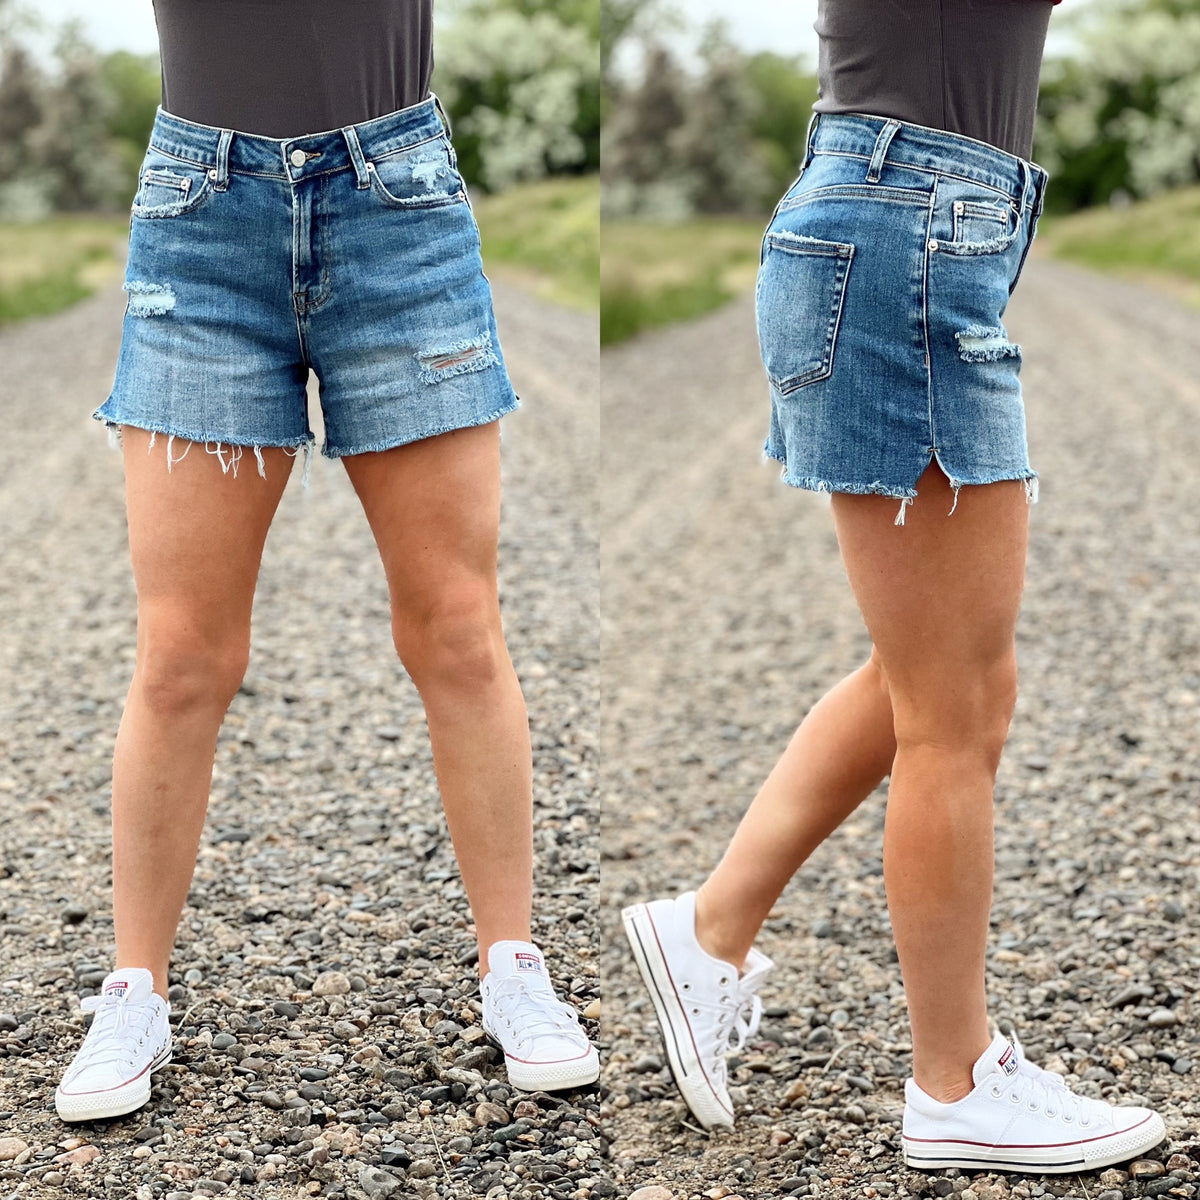 The Blakeley Shorts